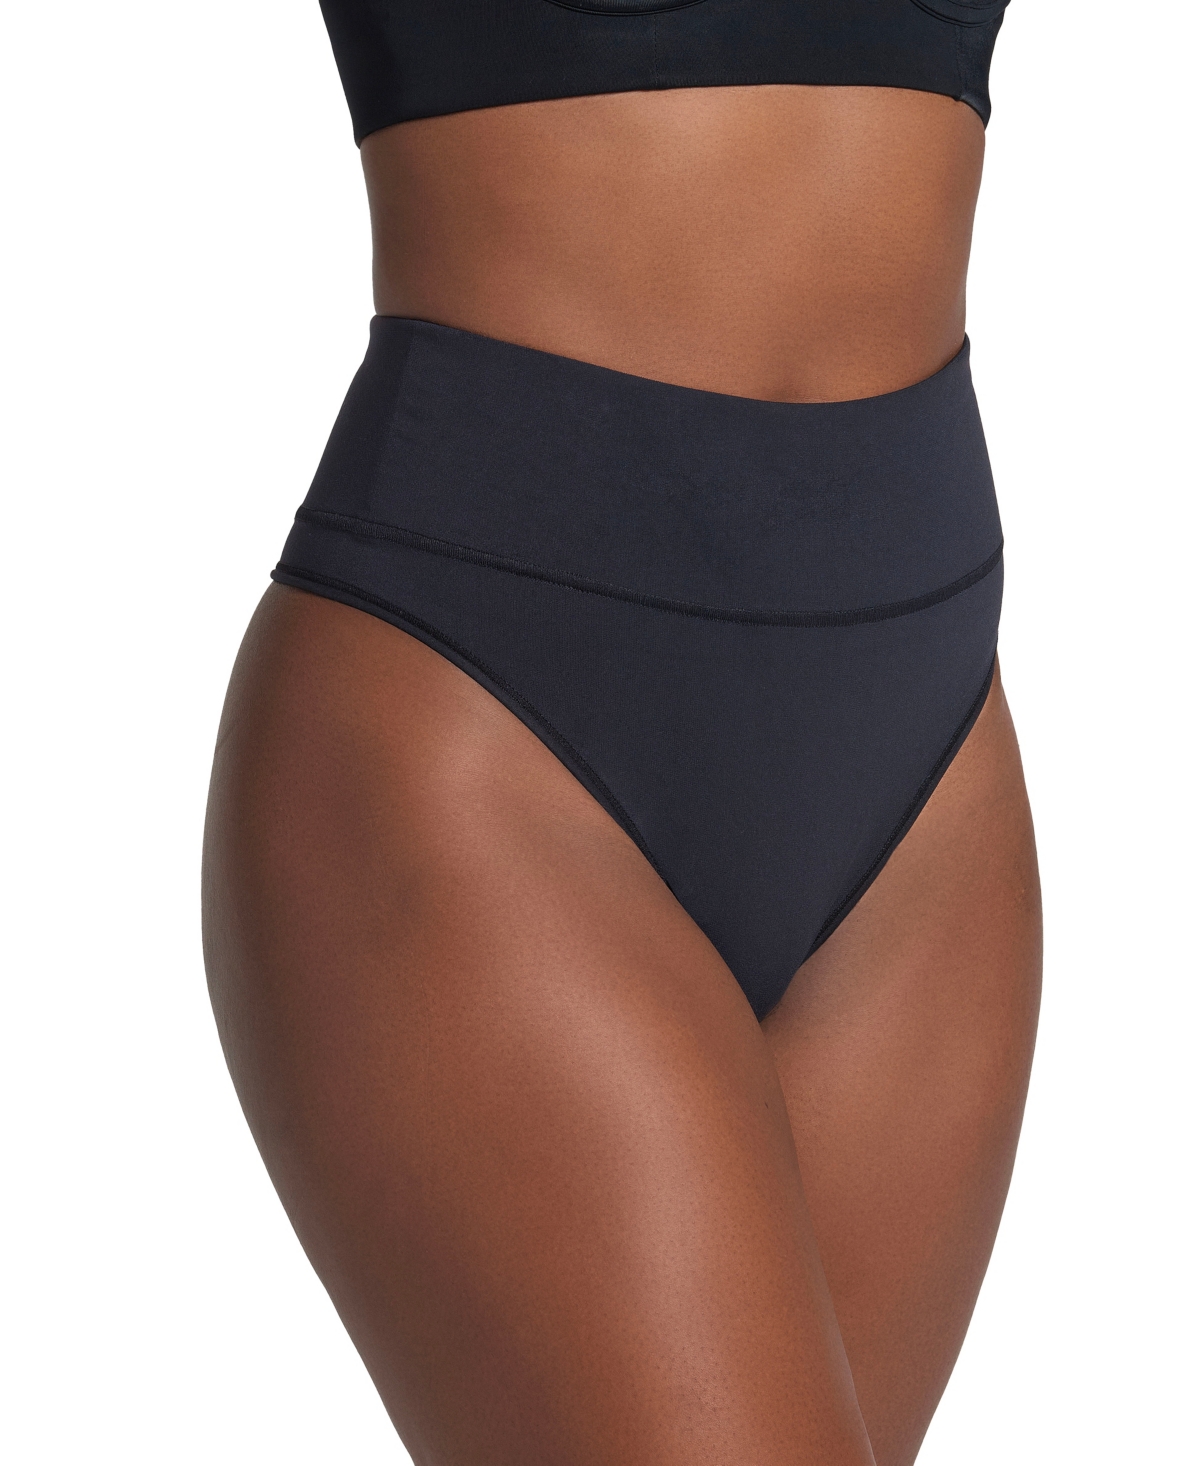 Women's High-Waisted Seamless Moderate Shaper Thong Panty - Brown